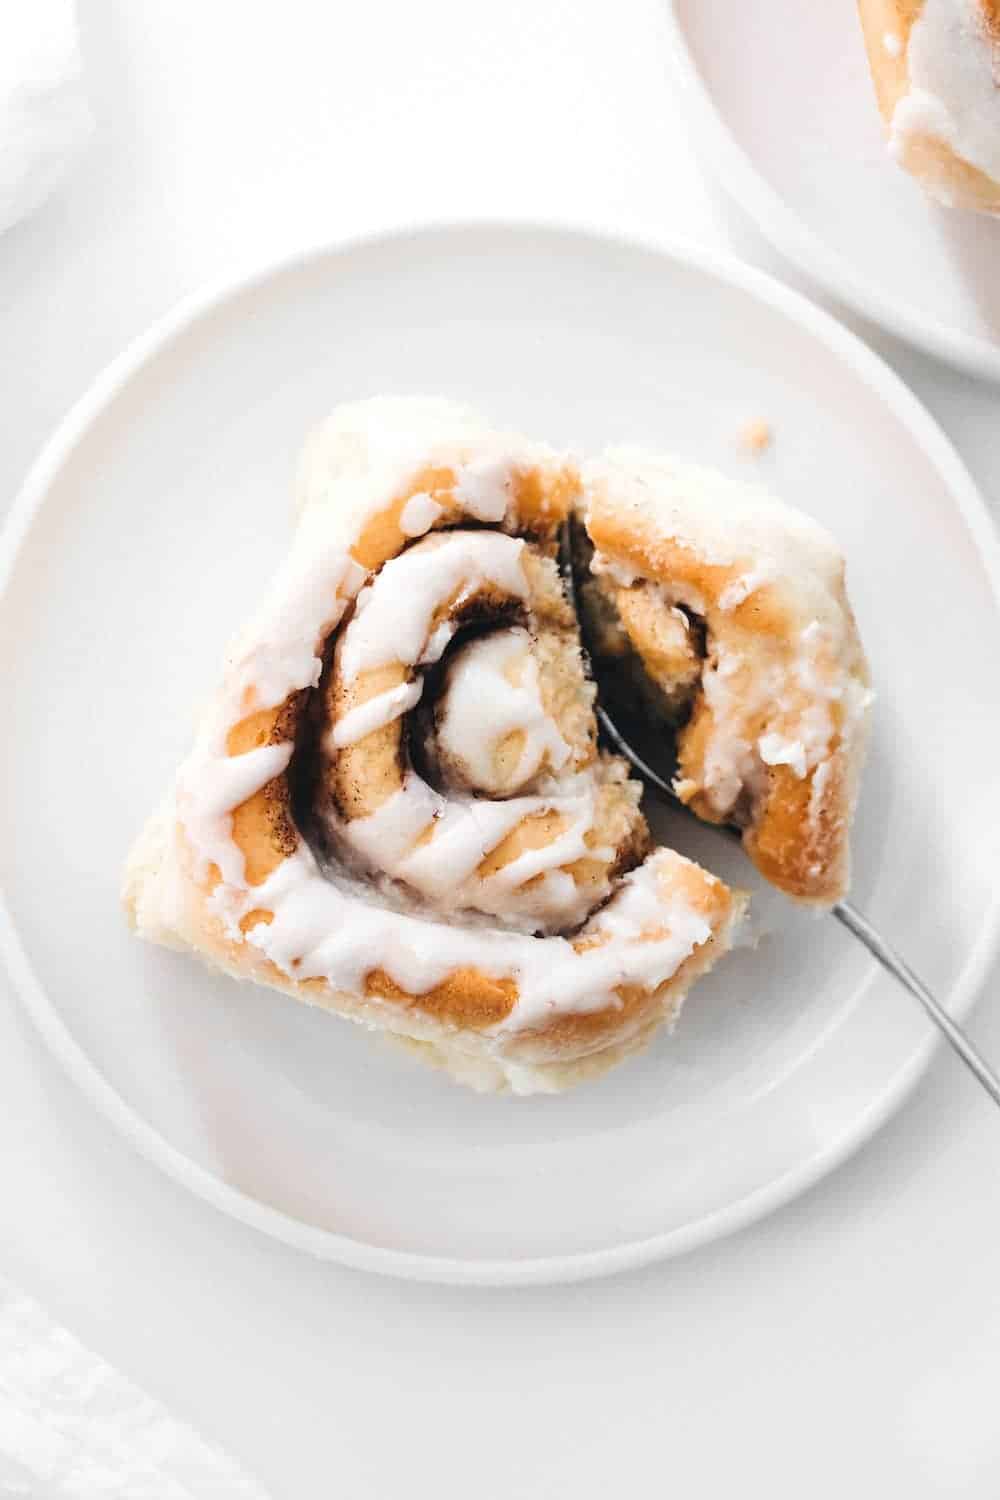 Chai cinnamon roll with maple frosting on a white plate with a fork